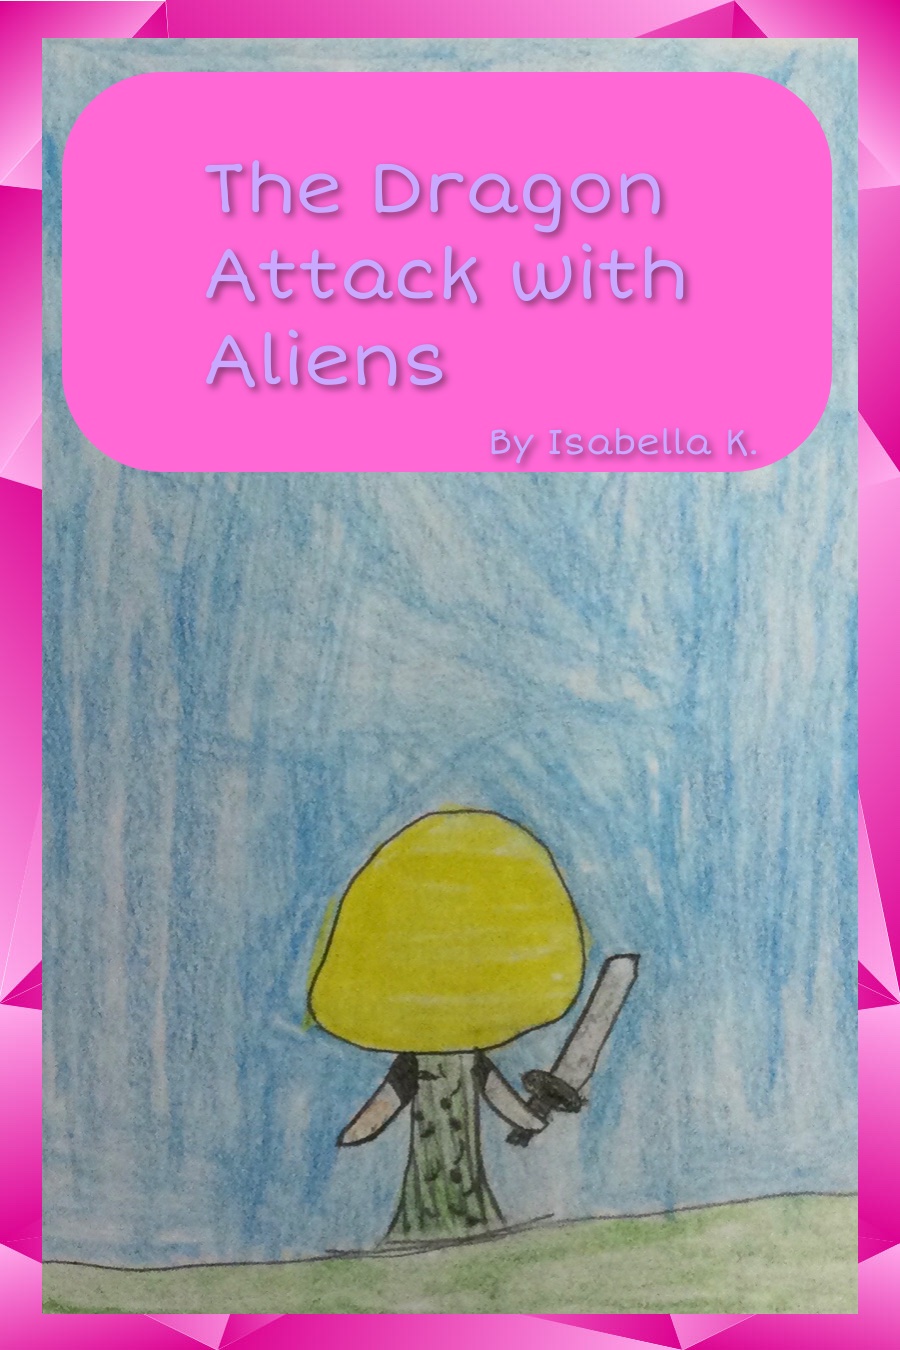 The Dragon Attack With the Aliens by Isabella K